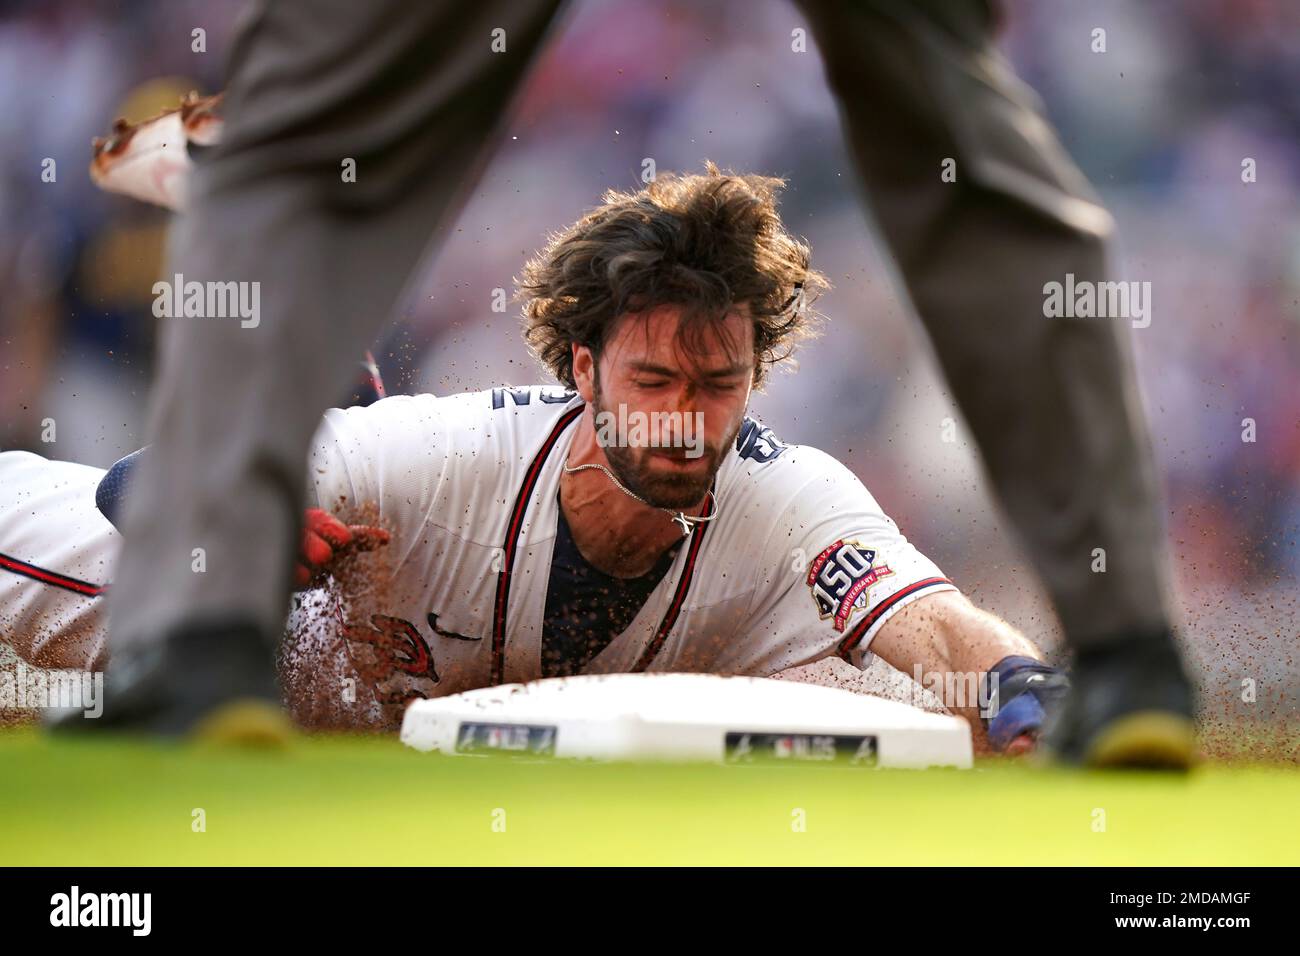 Dansby Swanson of the Atlanta Braves after sliding into third